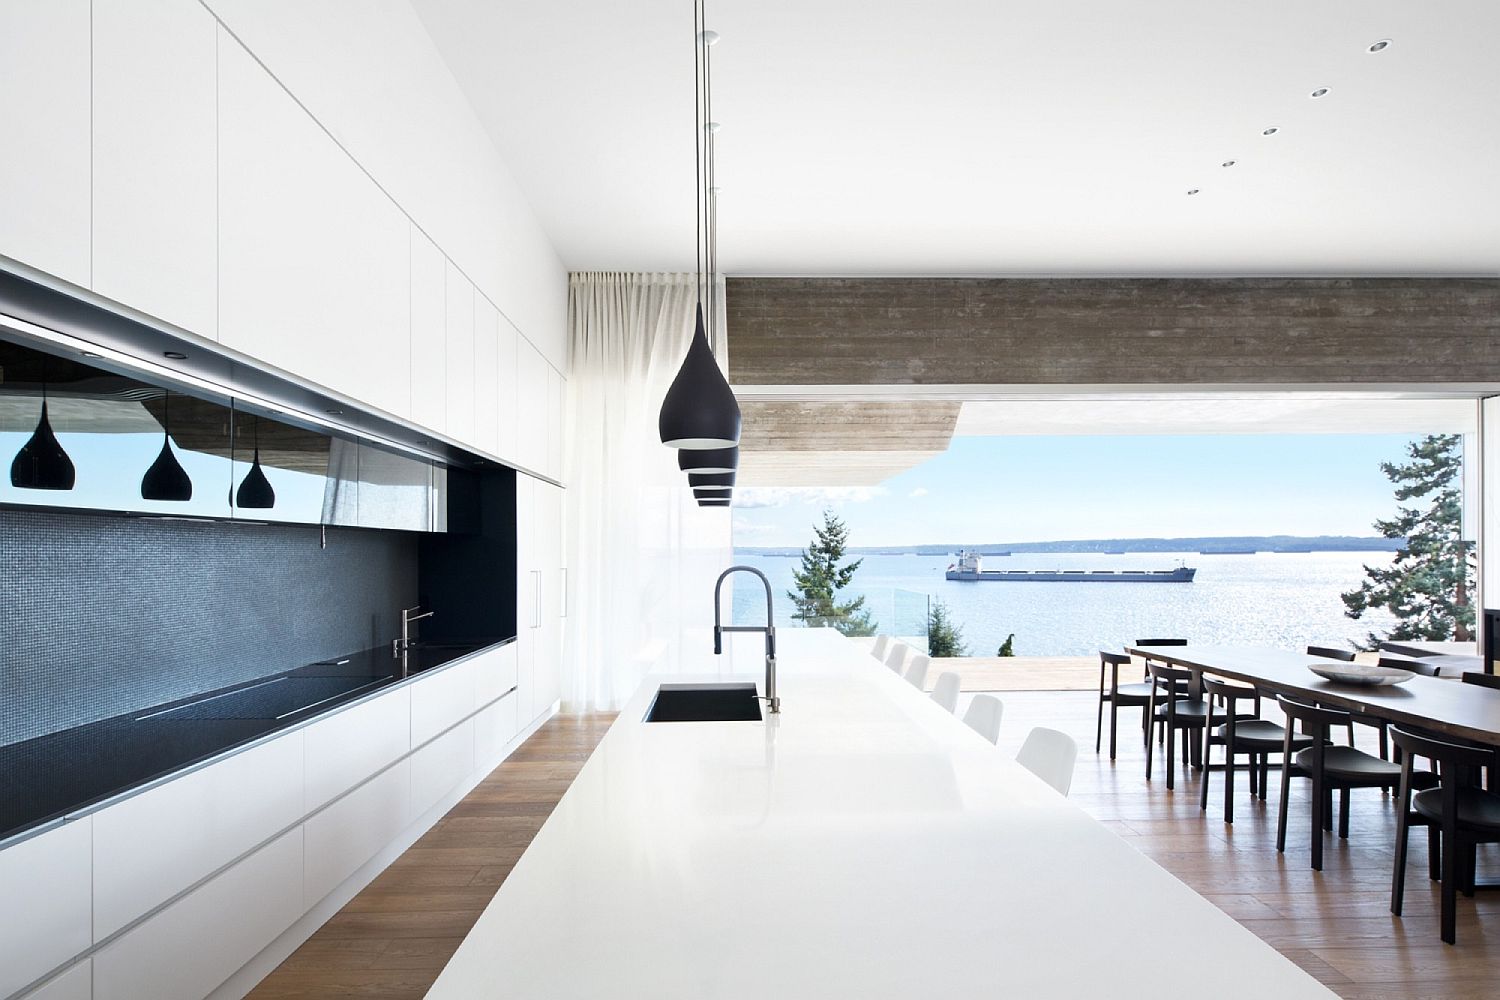 Dashing-minimal-kitchen-in-whit-with-large-island-and-black-pendant-lights